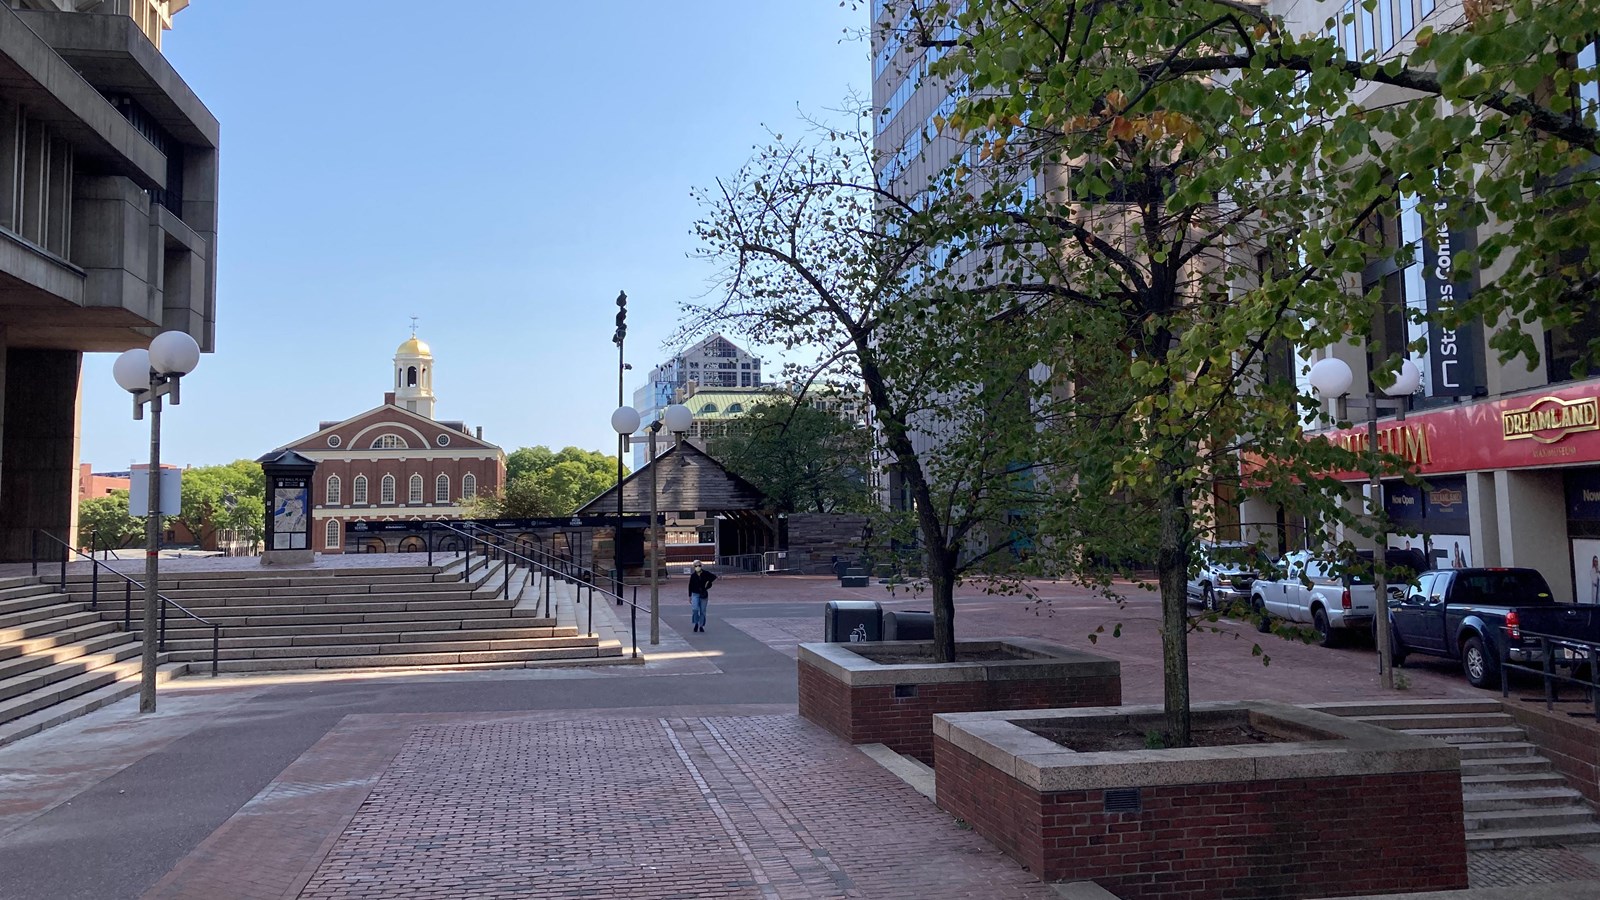 Open space at Government Center with Faneuil Hall in the distance and buildings to the right.